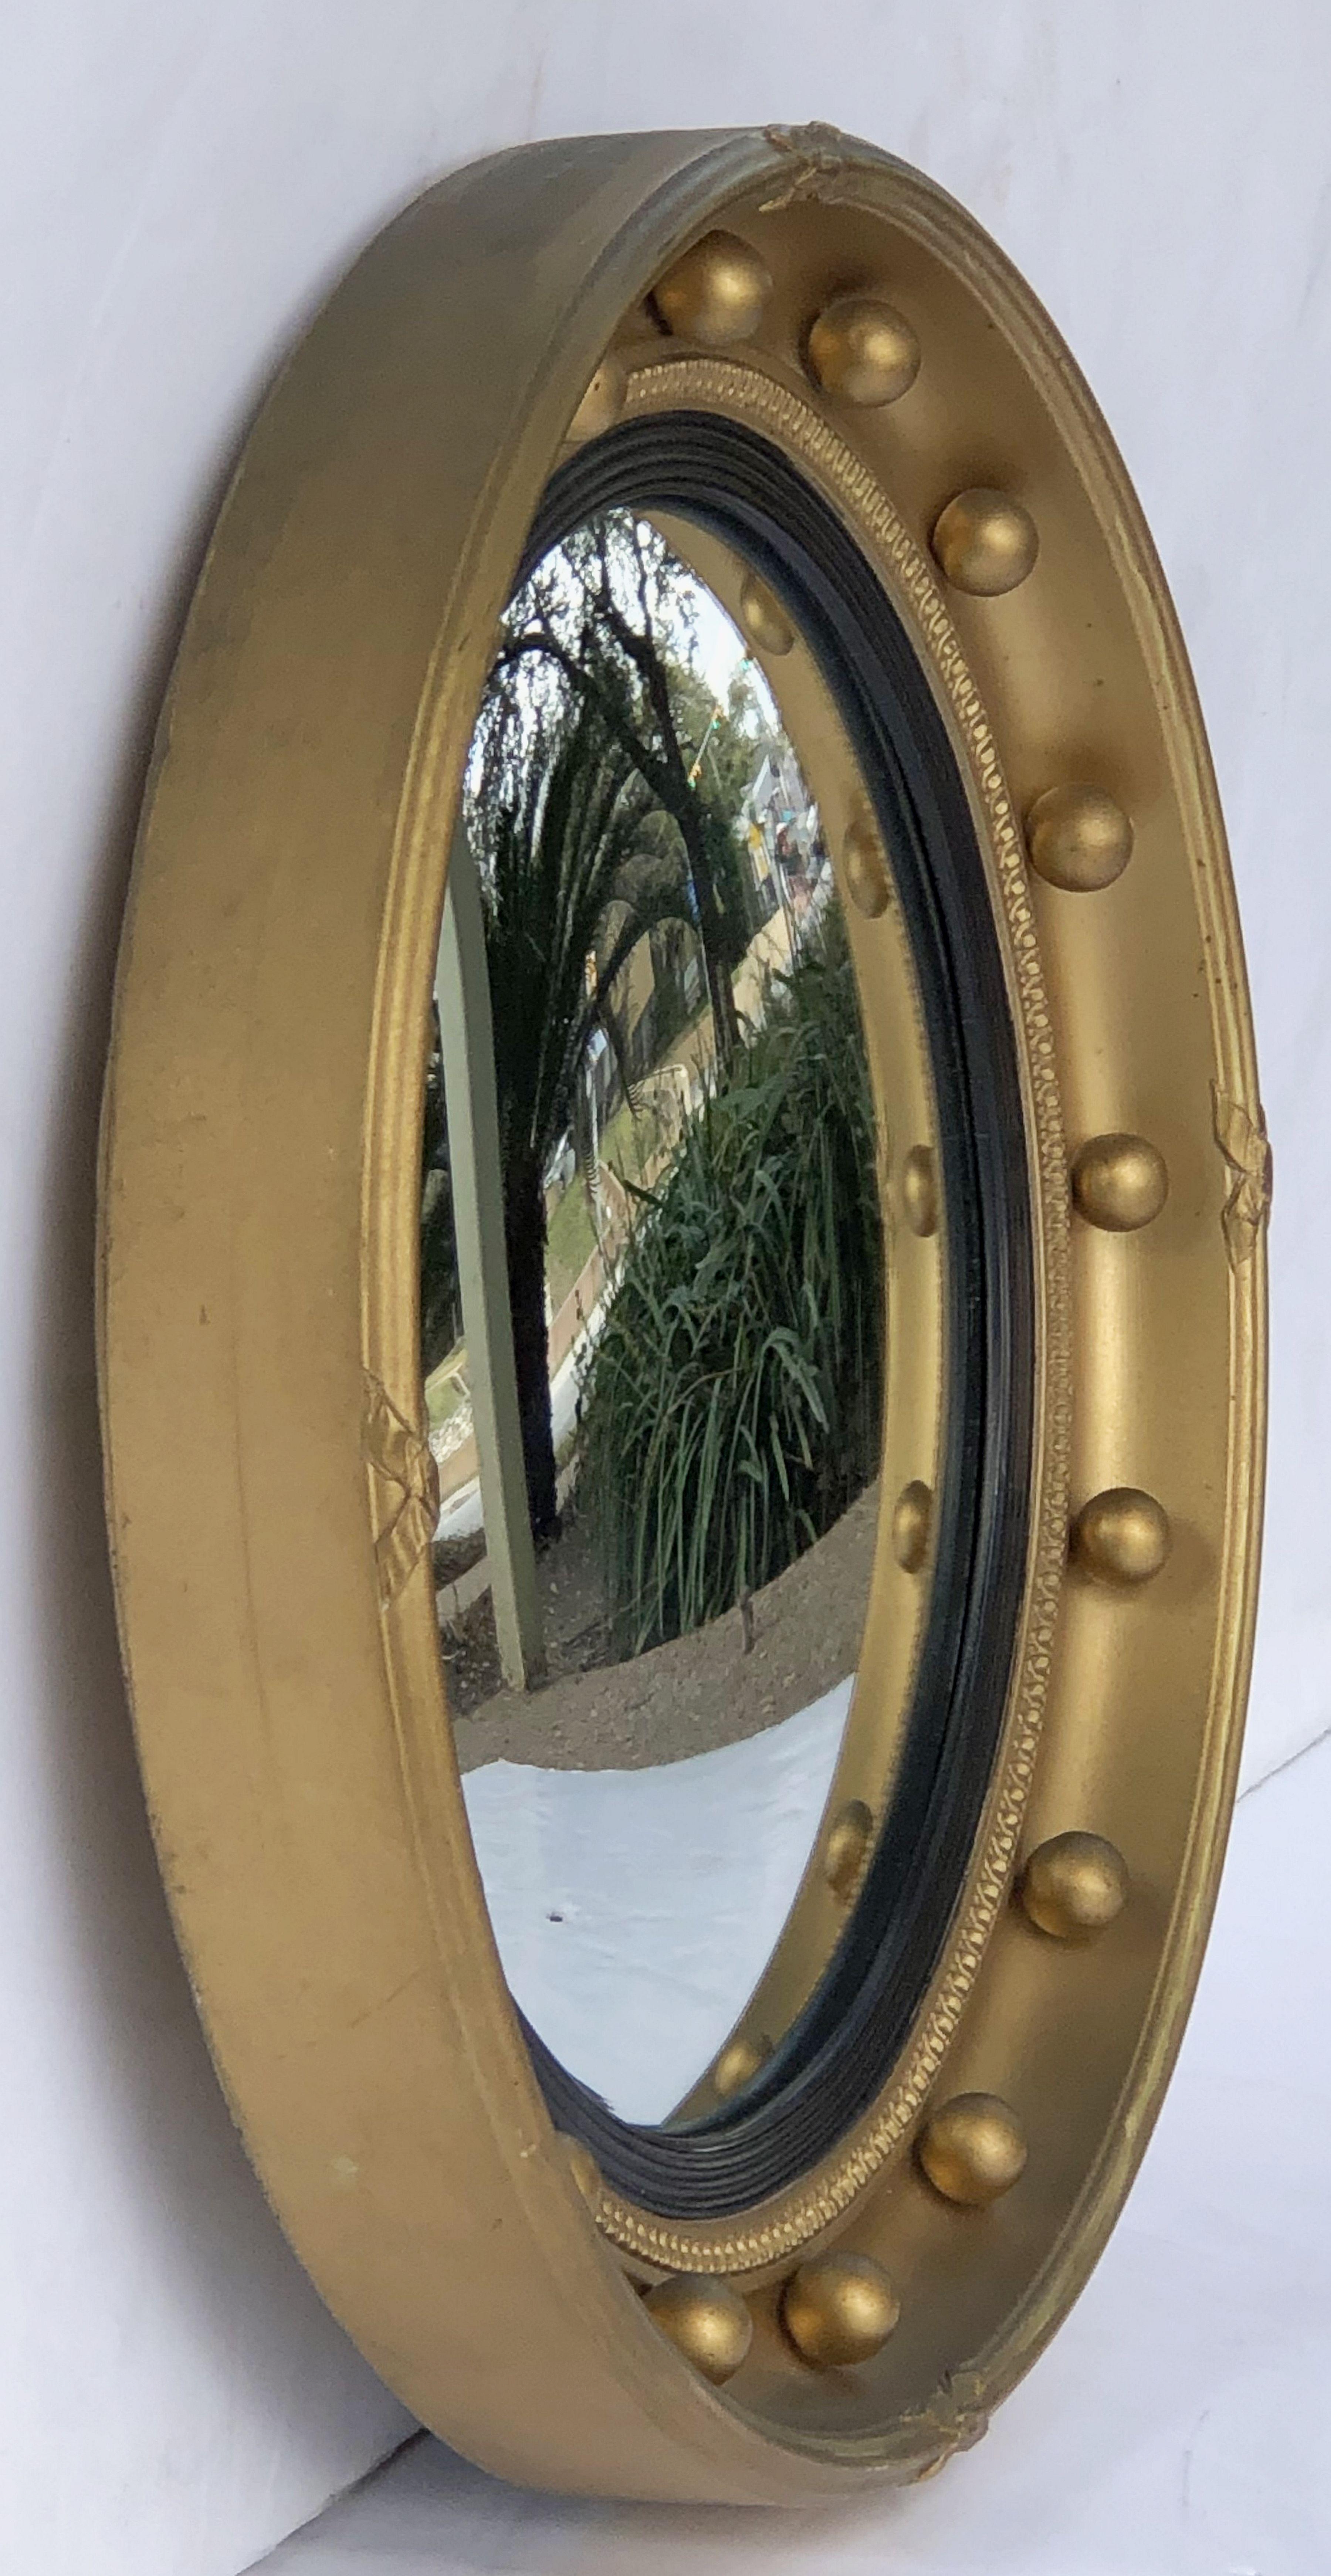 A fine English round or circular convex mirror featuring a Regency design of a moulded gilt frame and ebonized trim, with gilt balls around the circumference.

Dimensions: Diameter 16 1/4 inches x Depth 2 1/4 inches